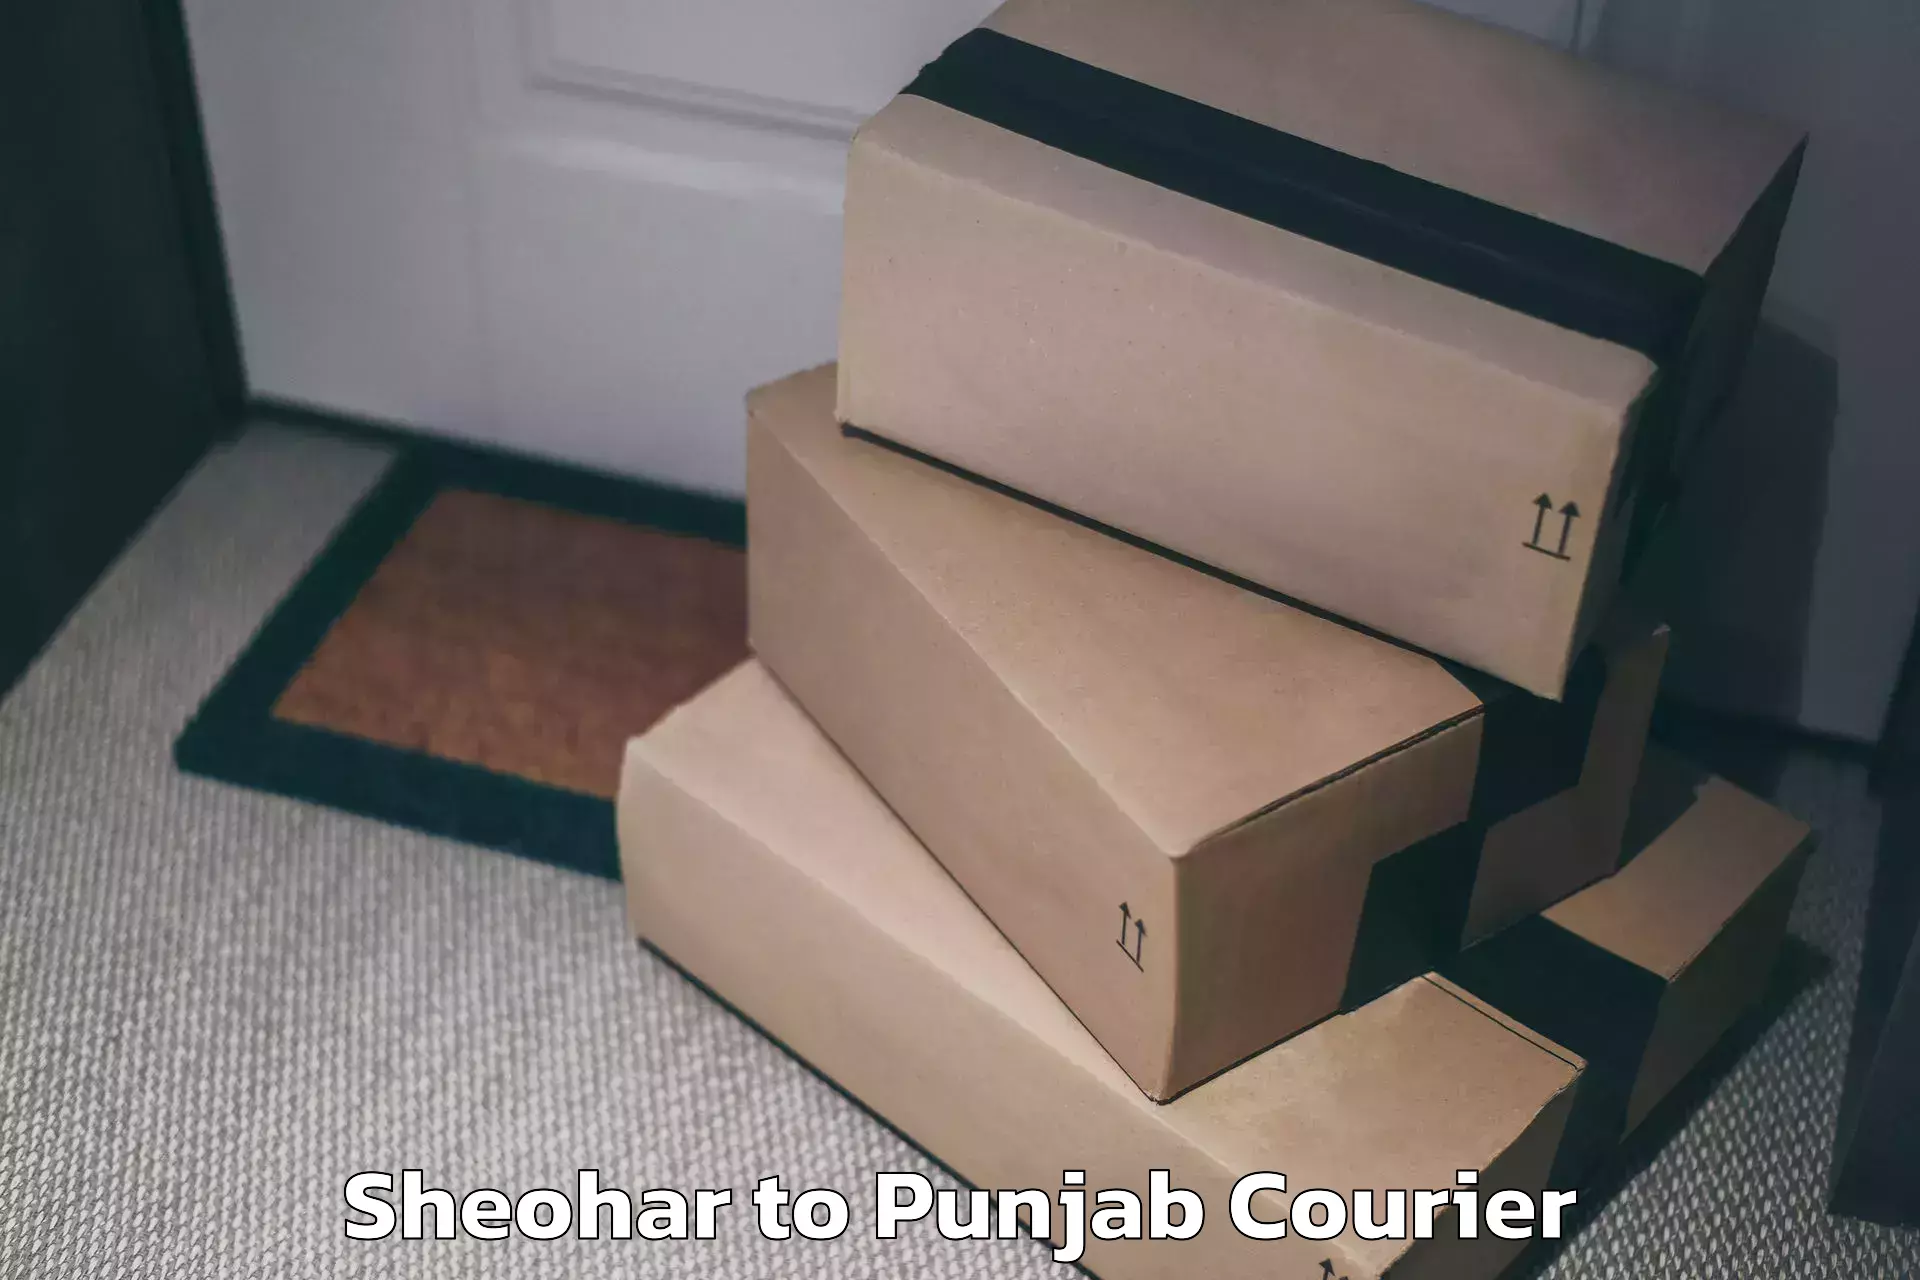 Luggage transfer service Sheohar to Pathankot